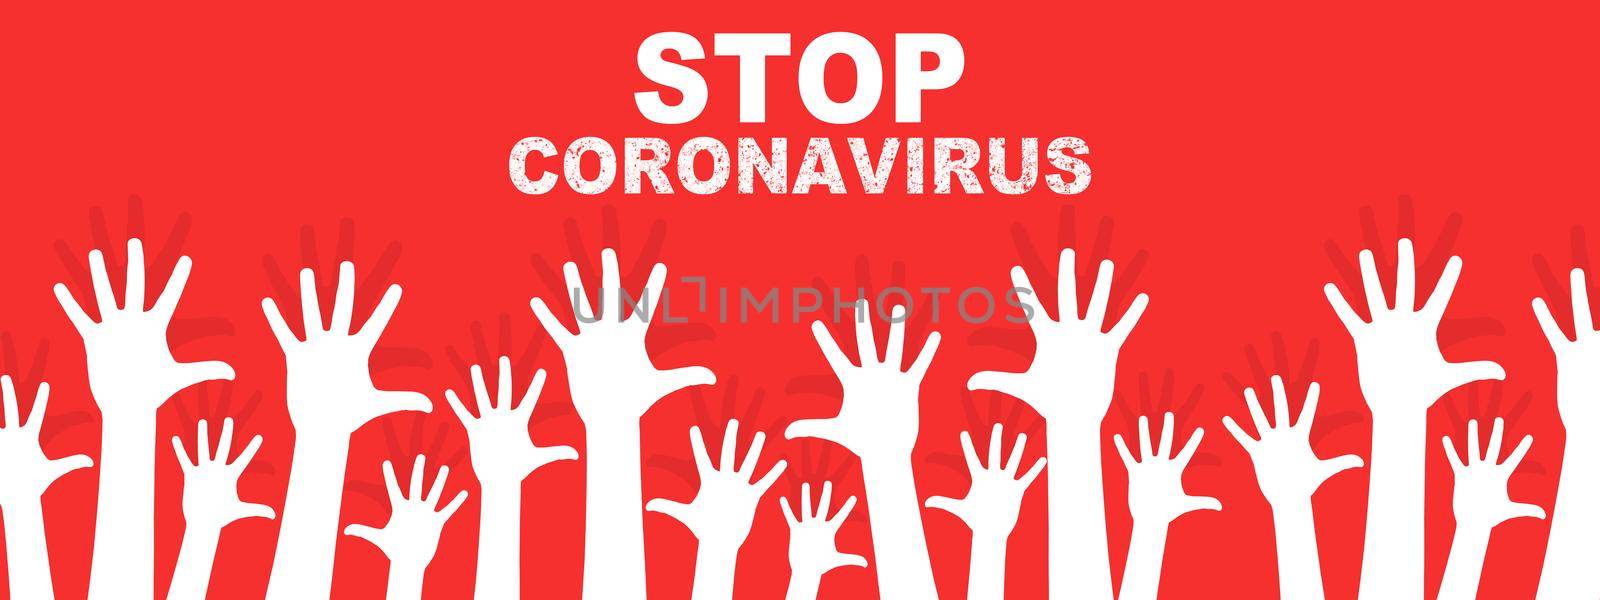 Stop Covid-19 conoravirus outbreak. Protect the world. by Taut